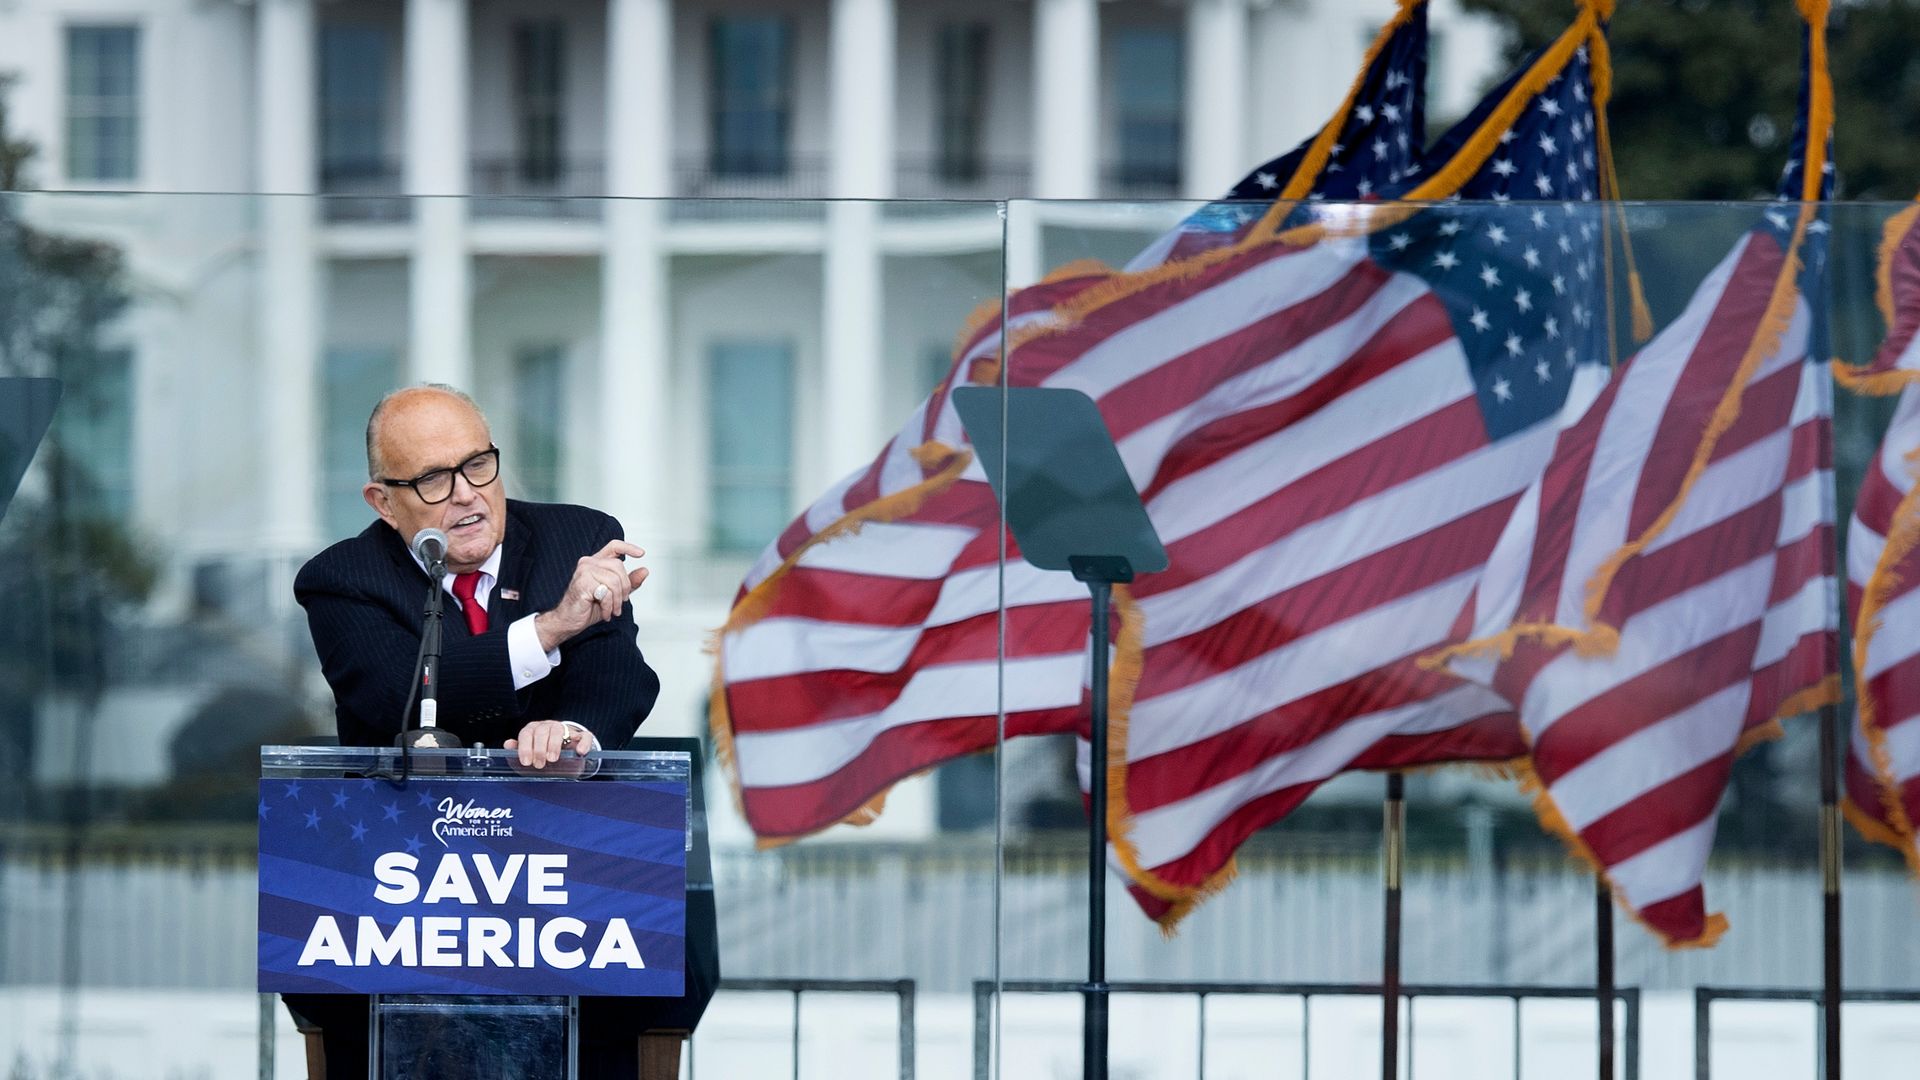 Rudy Giuliani speaking to Trump supporters near the White House on Jan. 6.